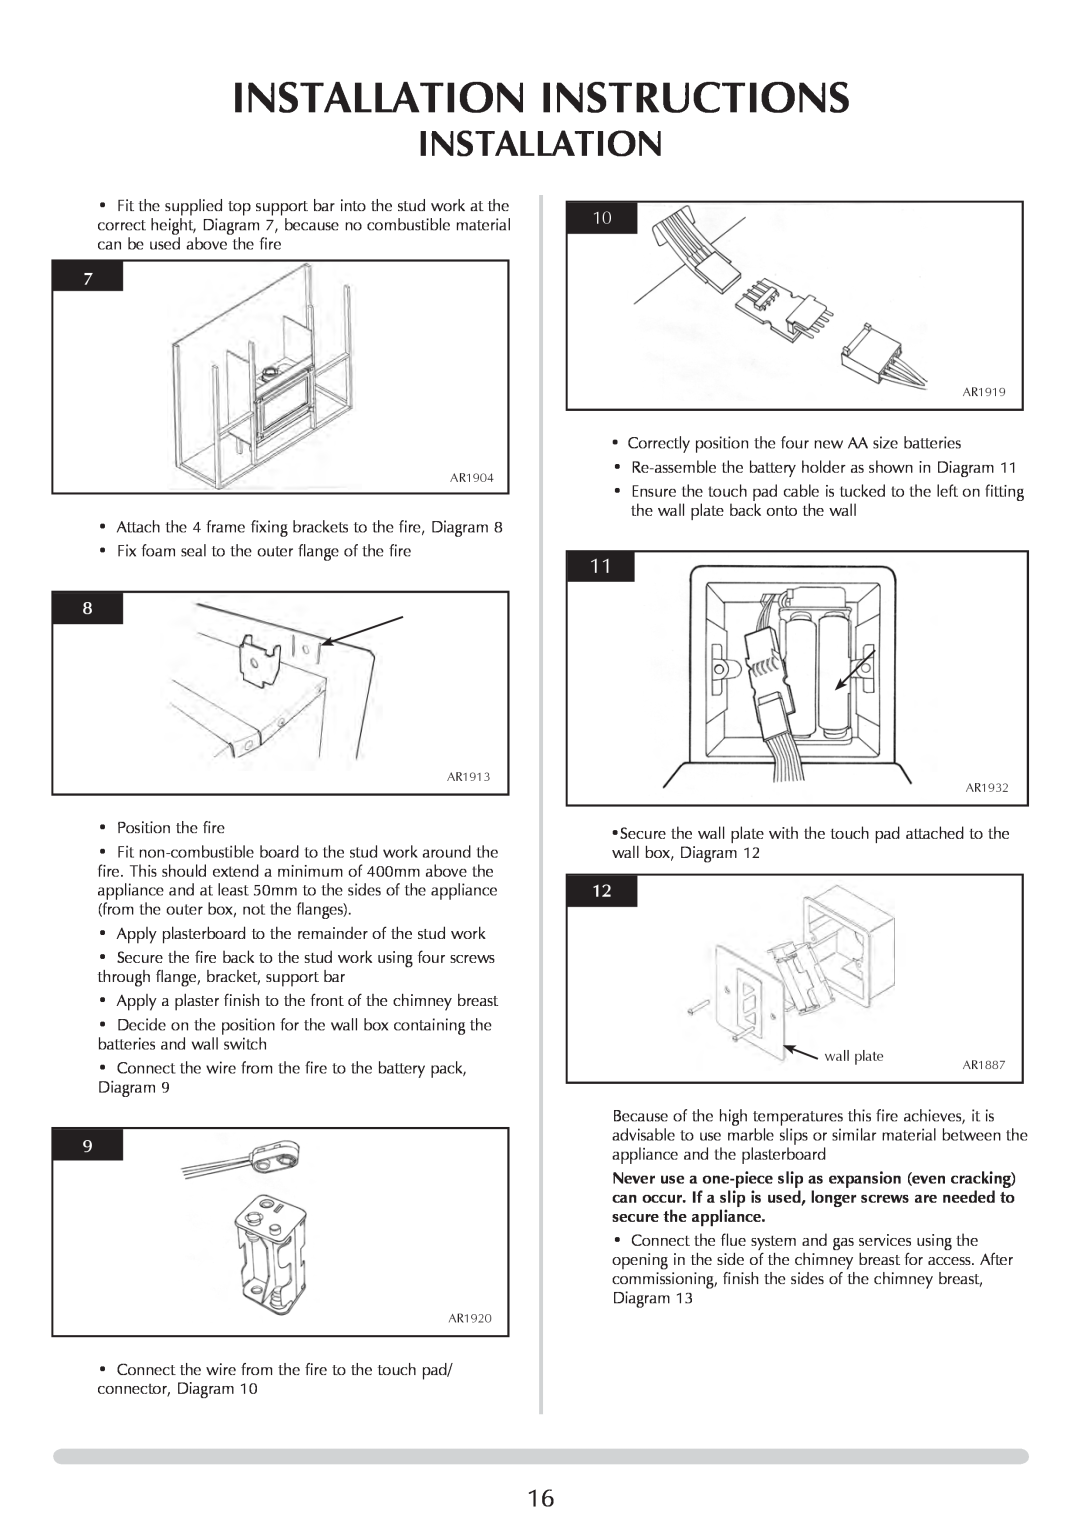 Stovax PR0919 manual Installation Instructions, Fix foam seal to the outer flange of the fire 